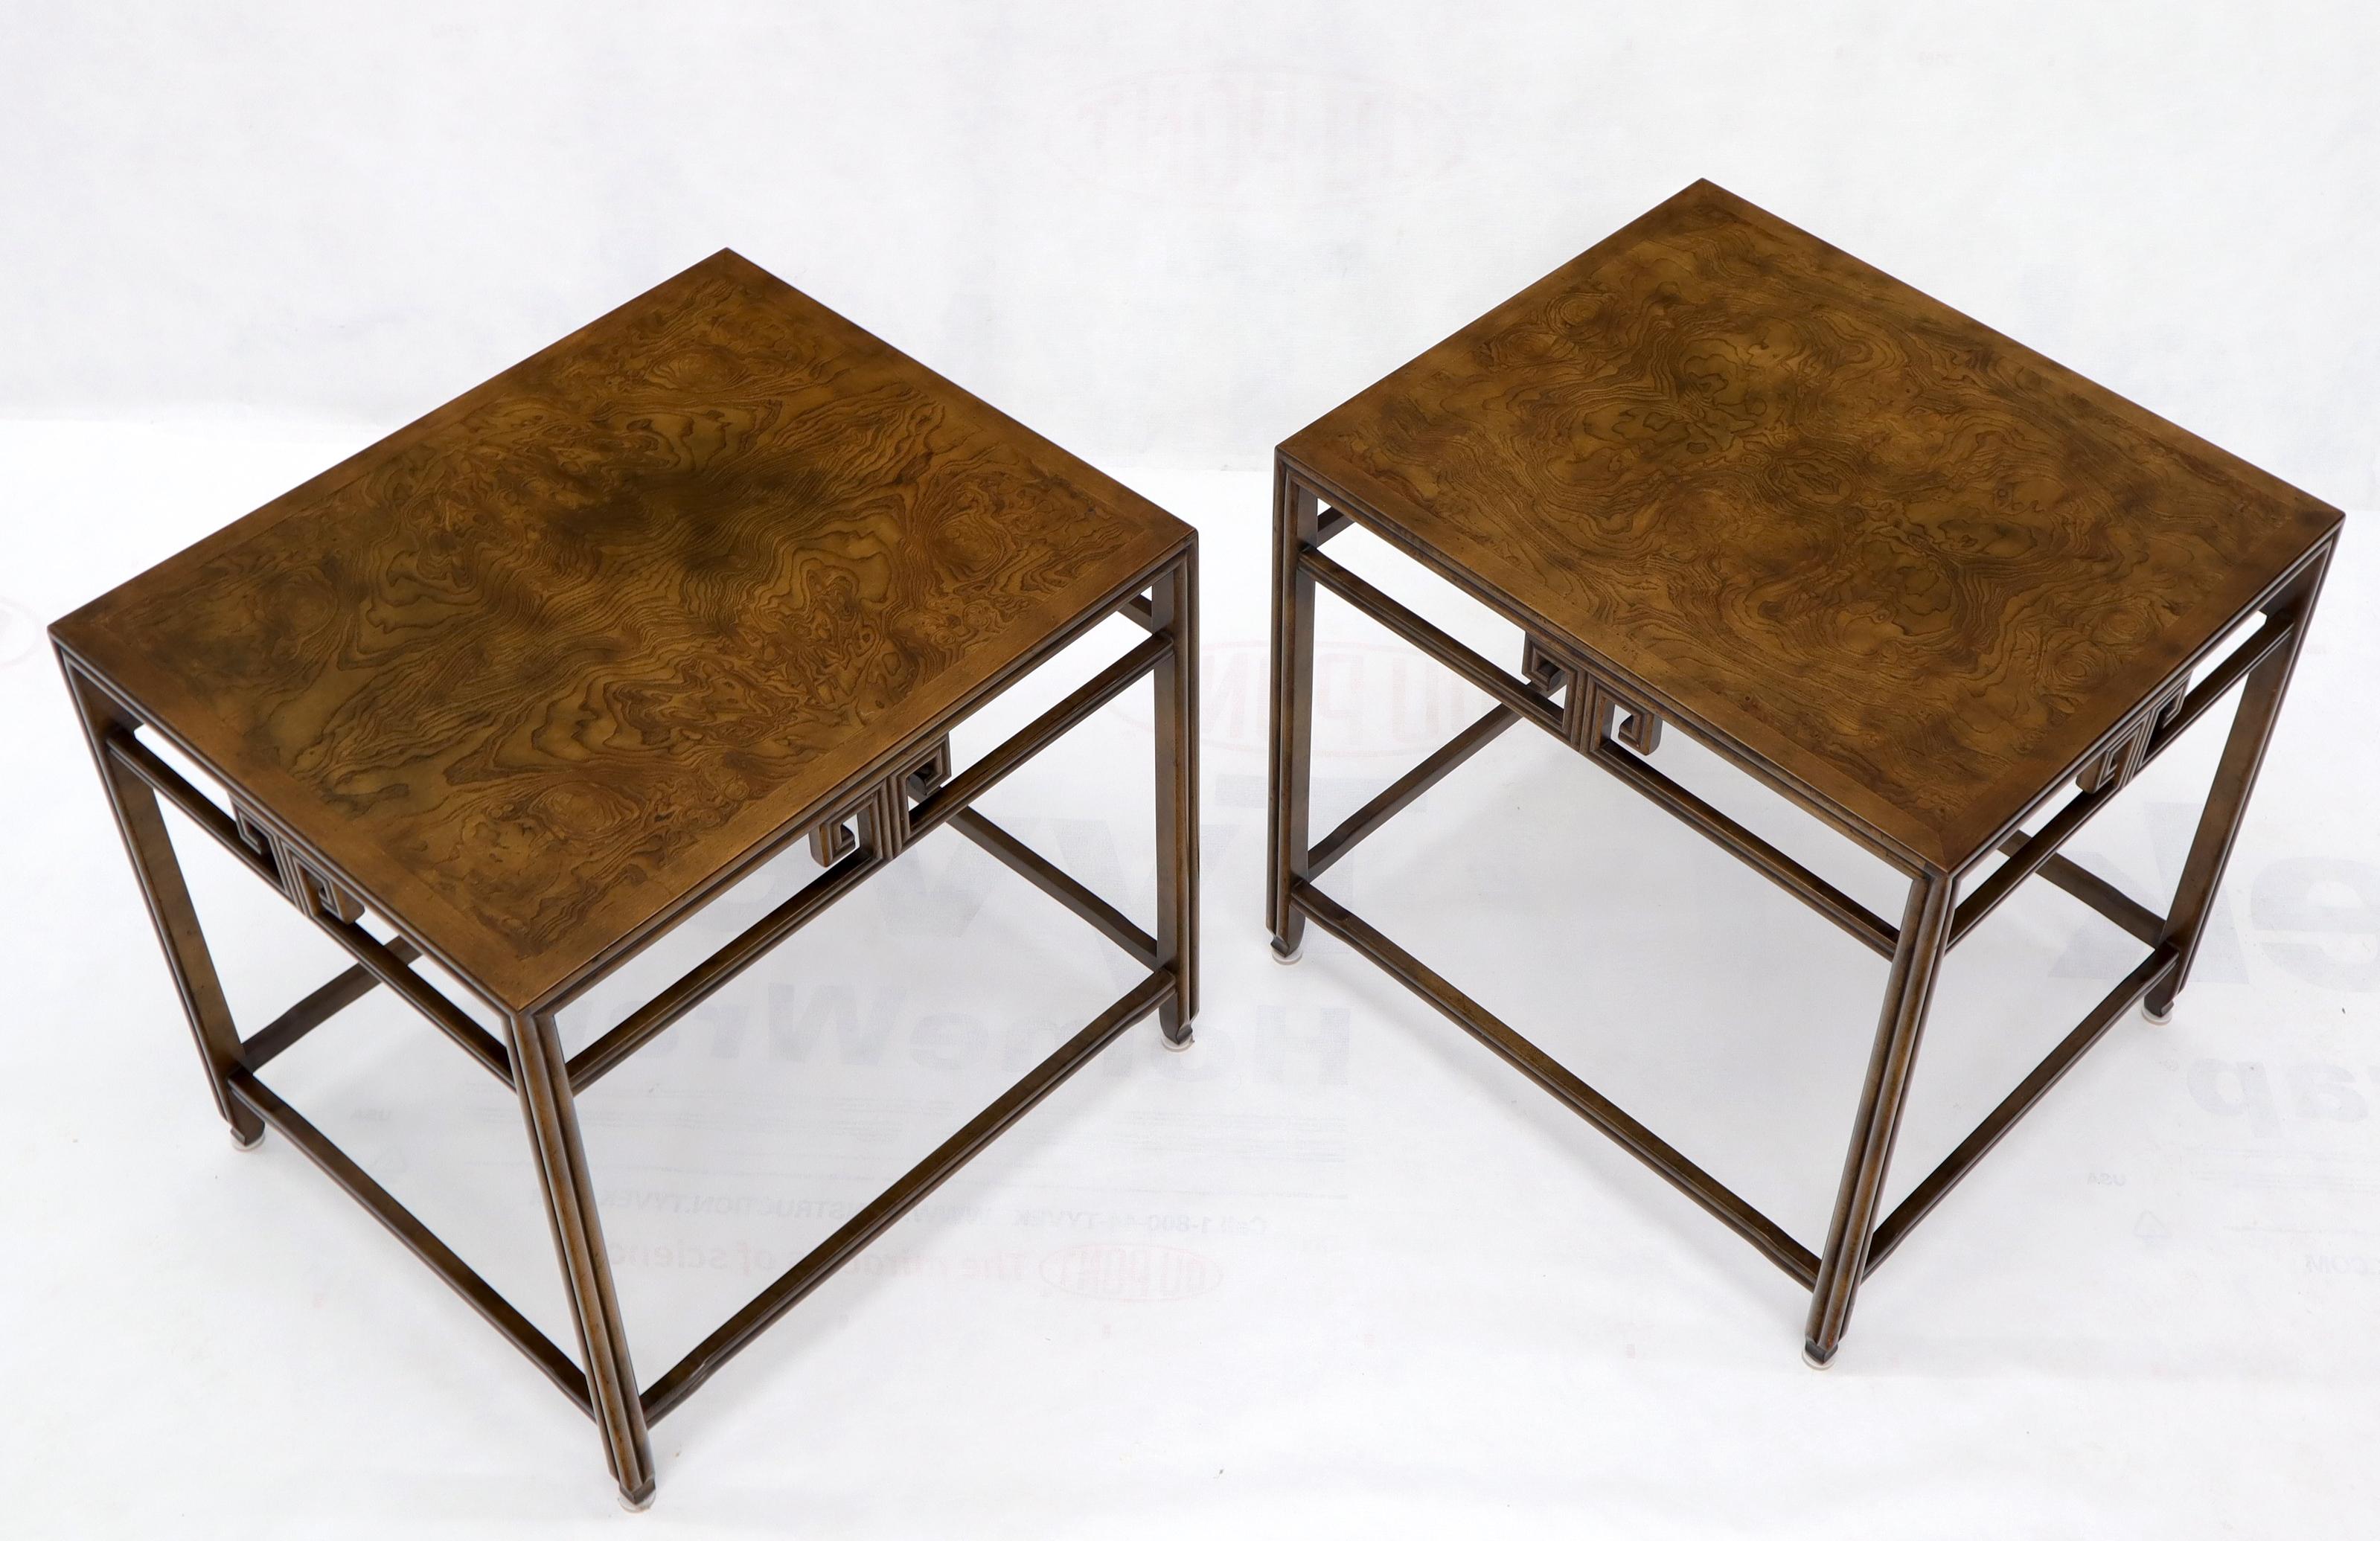 Lacquered Pair of Burl Wood Asian Influence Side End Tables Stands by Baker